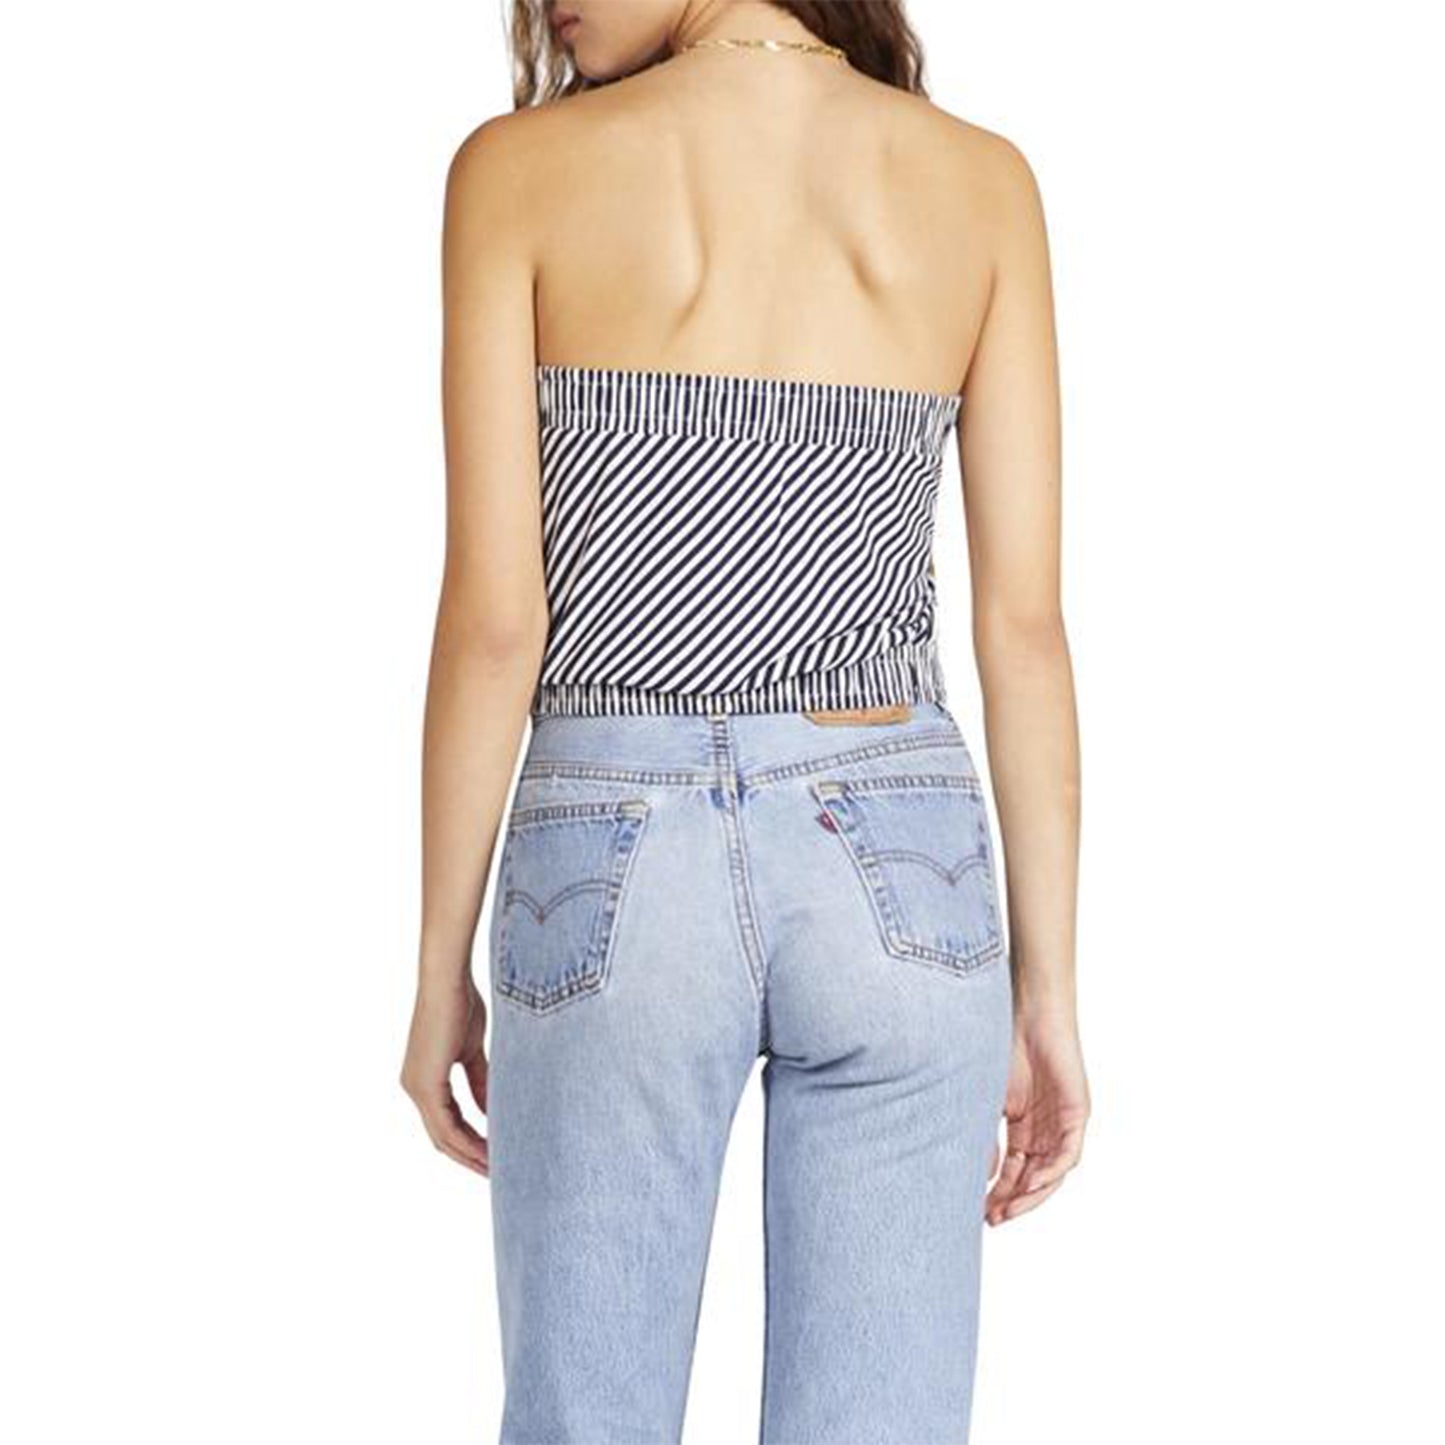 BB Dakota Find My Way Top. Give your everyday look a fun update with this cute piece! Featuring a striped material, tube top style, elastic detail at the top and bottom hem, and  cropped length. Style this with a denim skirt and platform sandals fora look we are obsessing over. 